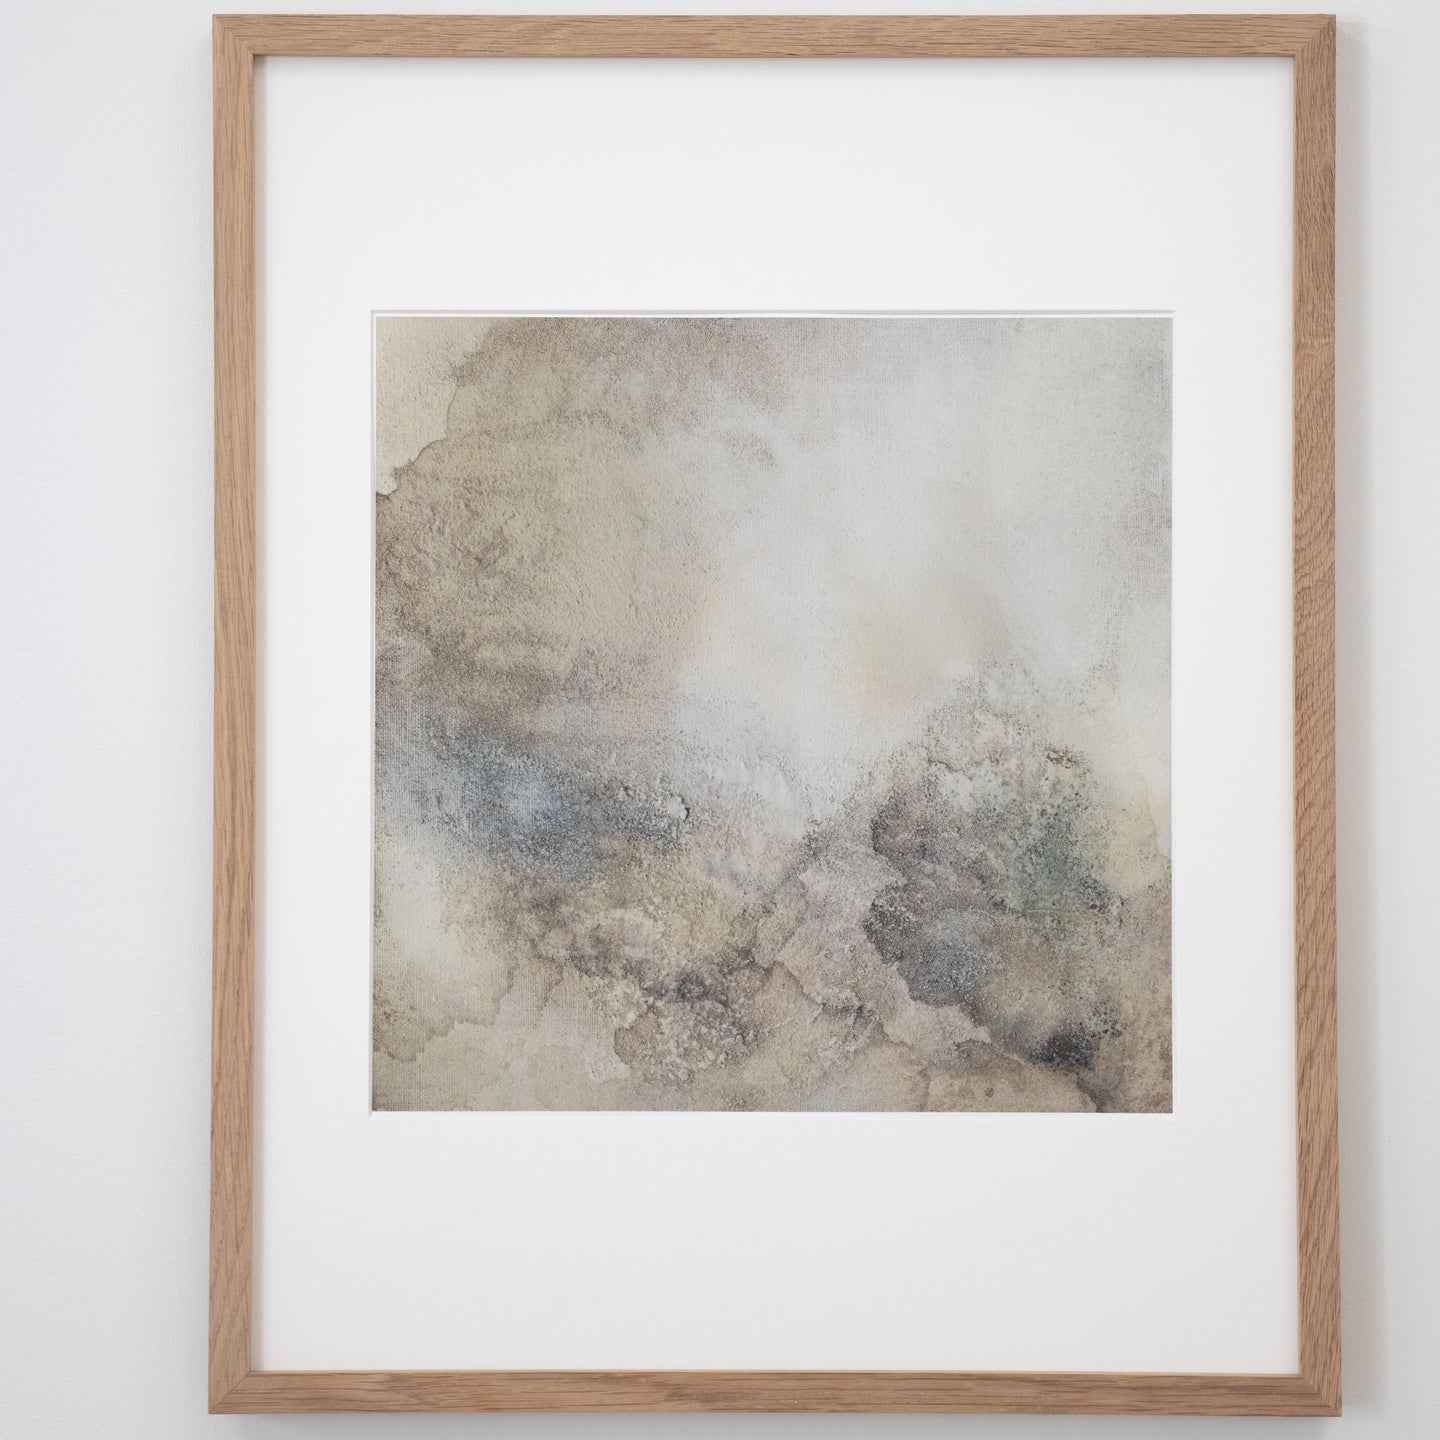 Of Mist and Morning Light (print)